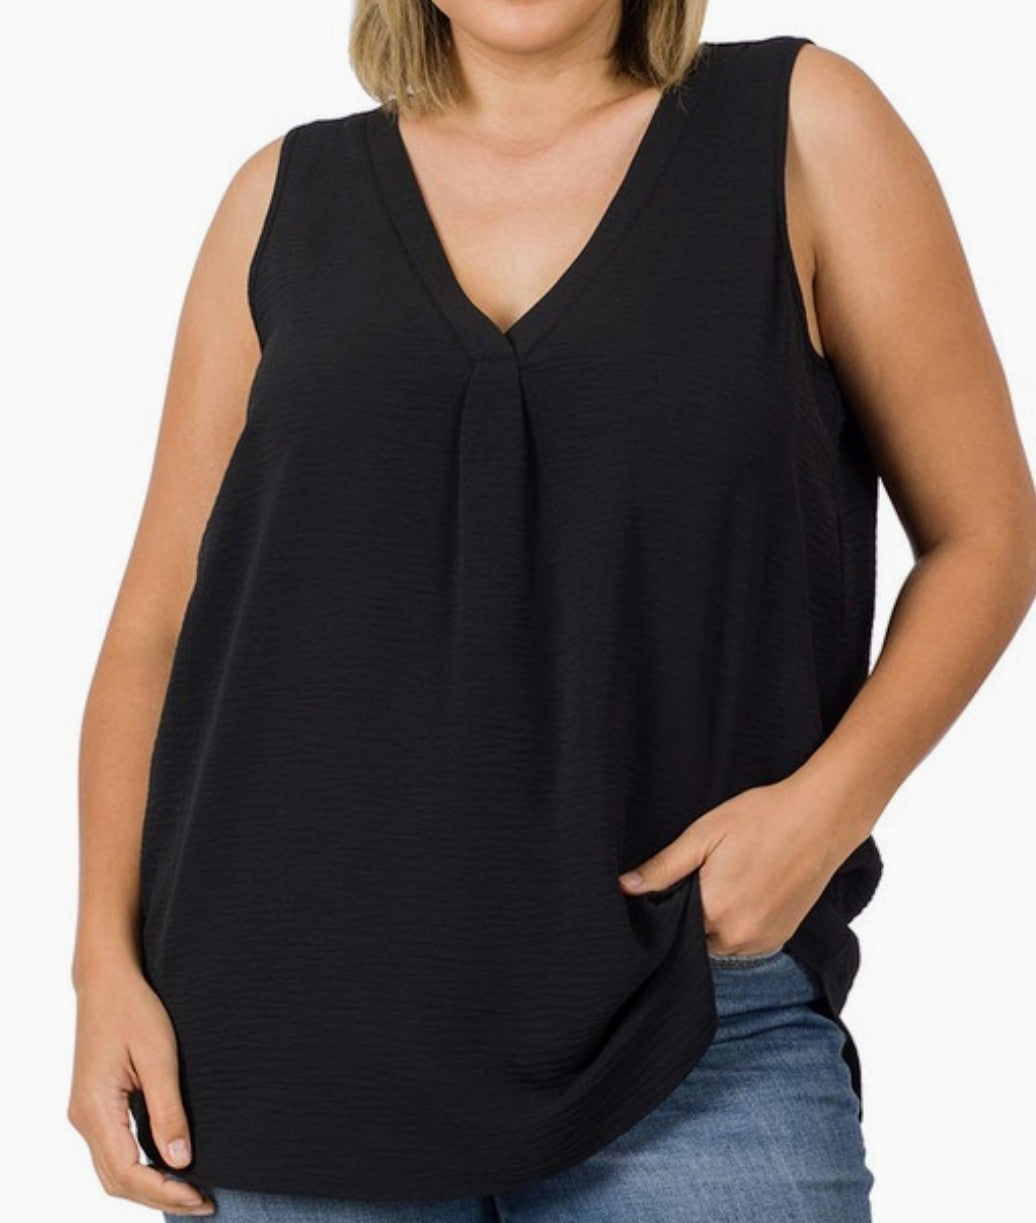 The Moxie Top - Curvy Collection